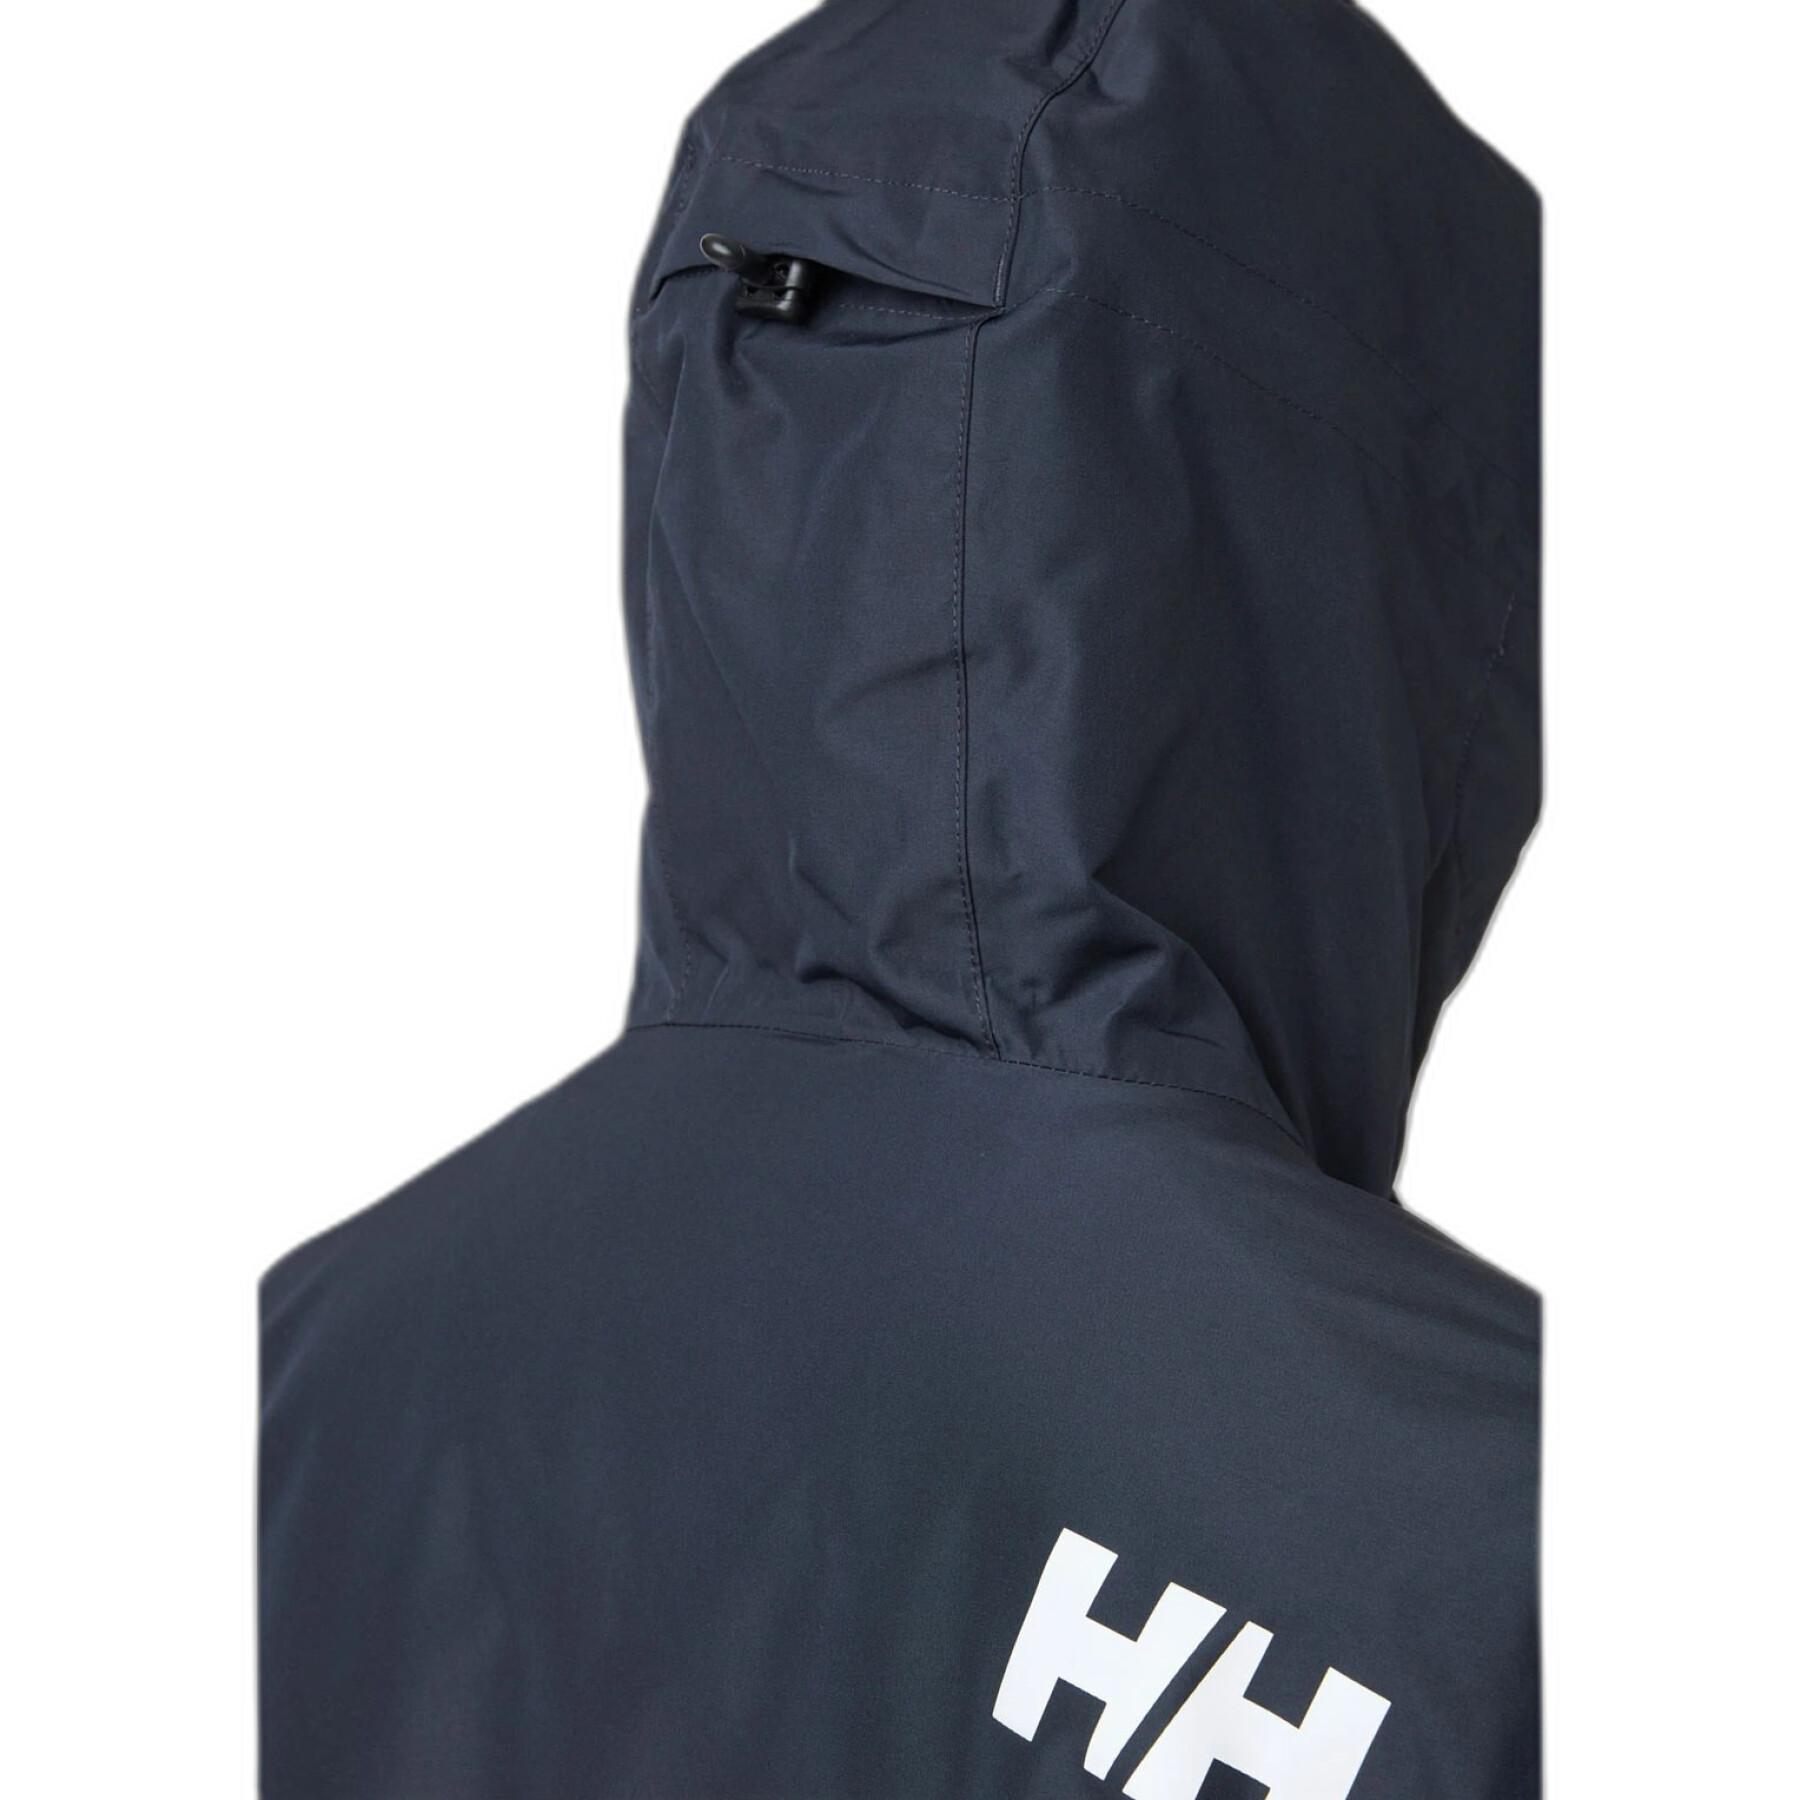 Chaqueta impermeable Helly Hansen Rigging